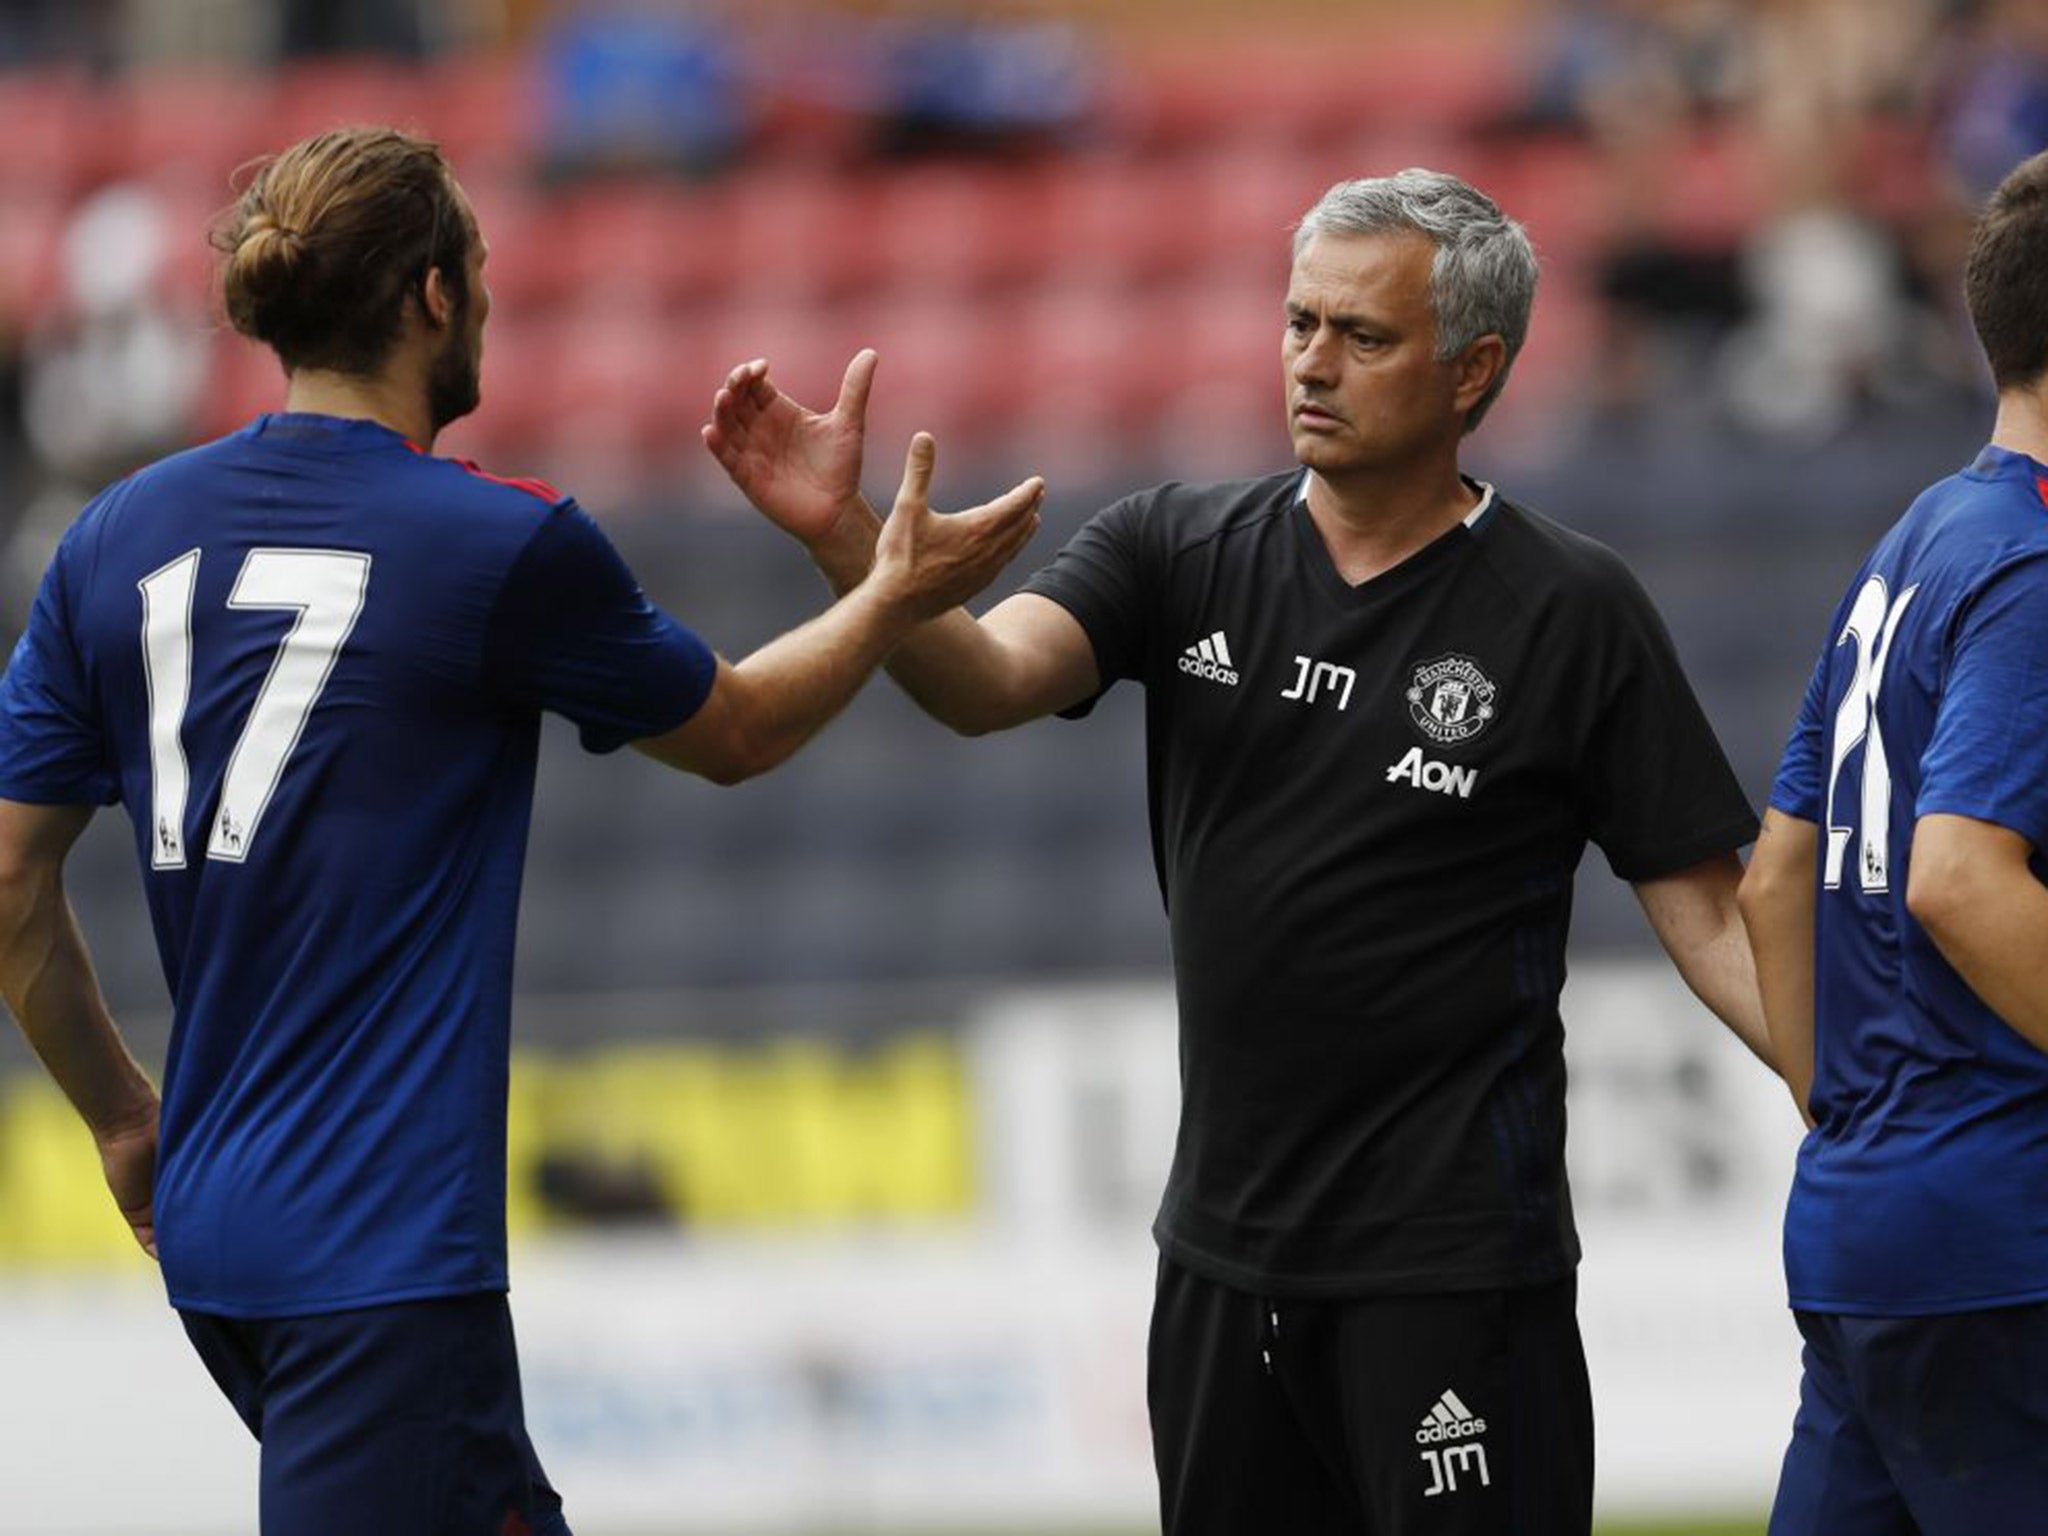 Jose Mourinho shakes hands with Daley Blind after the 2-0 win over Wigan